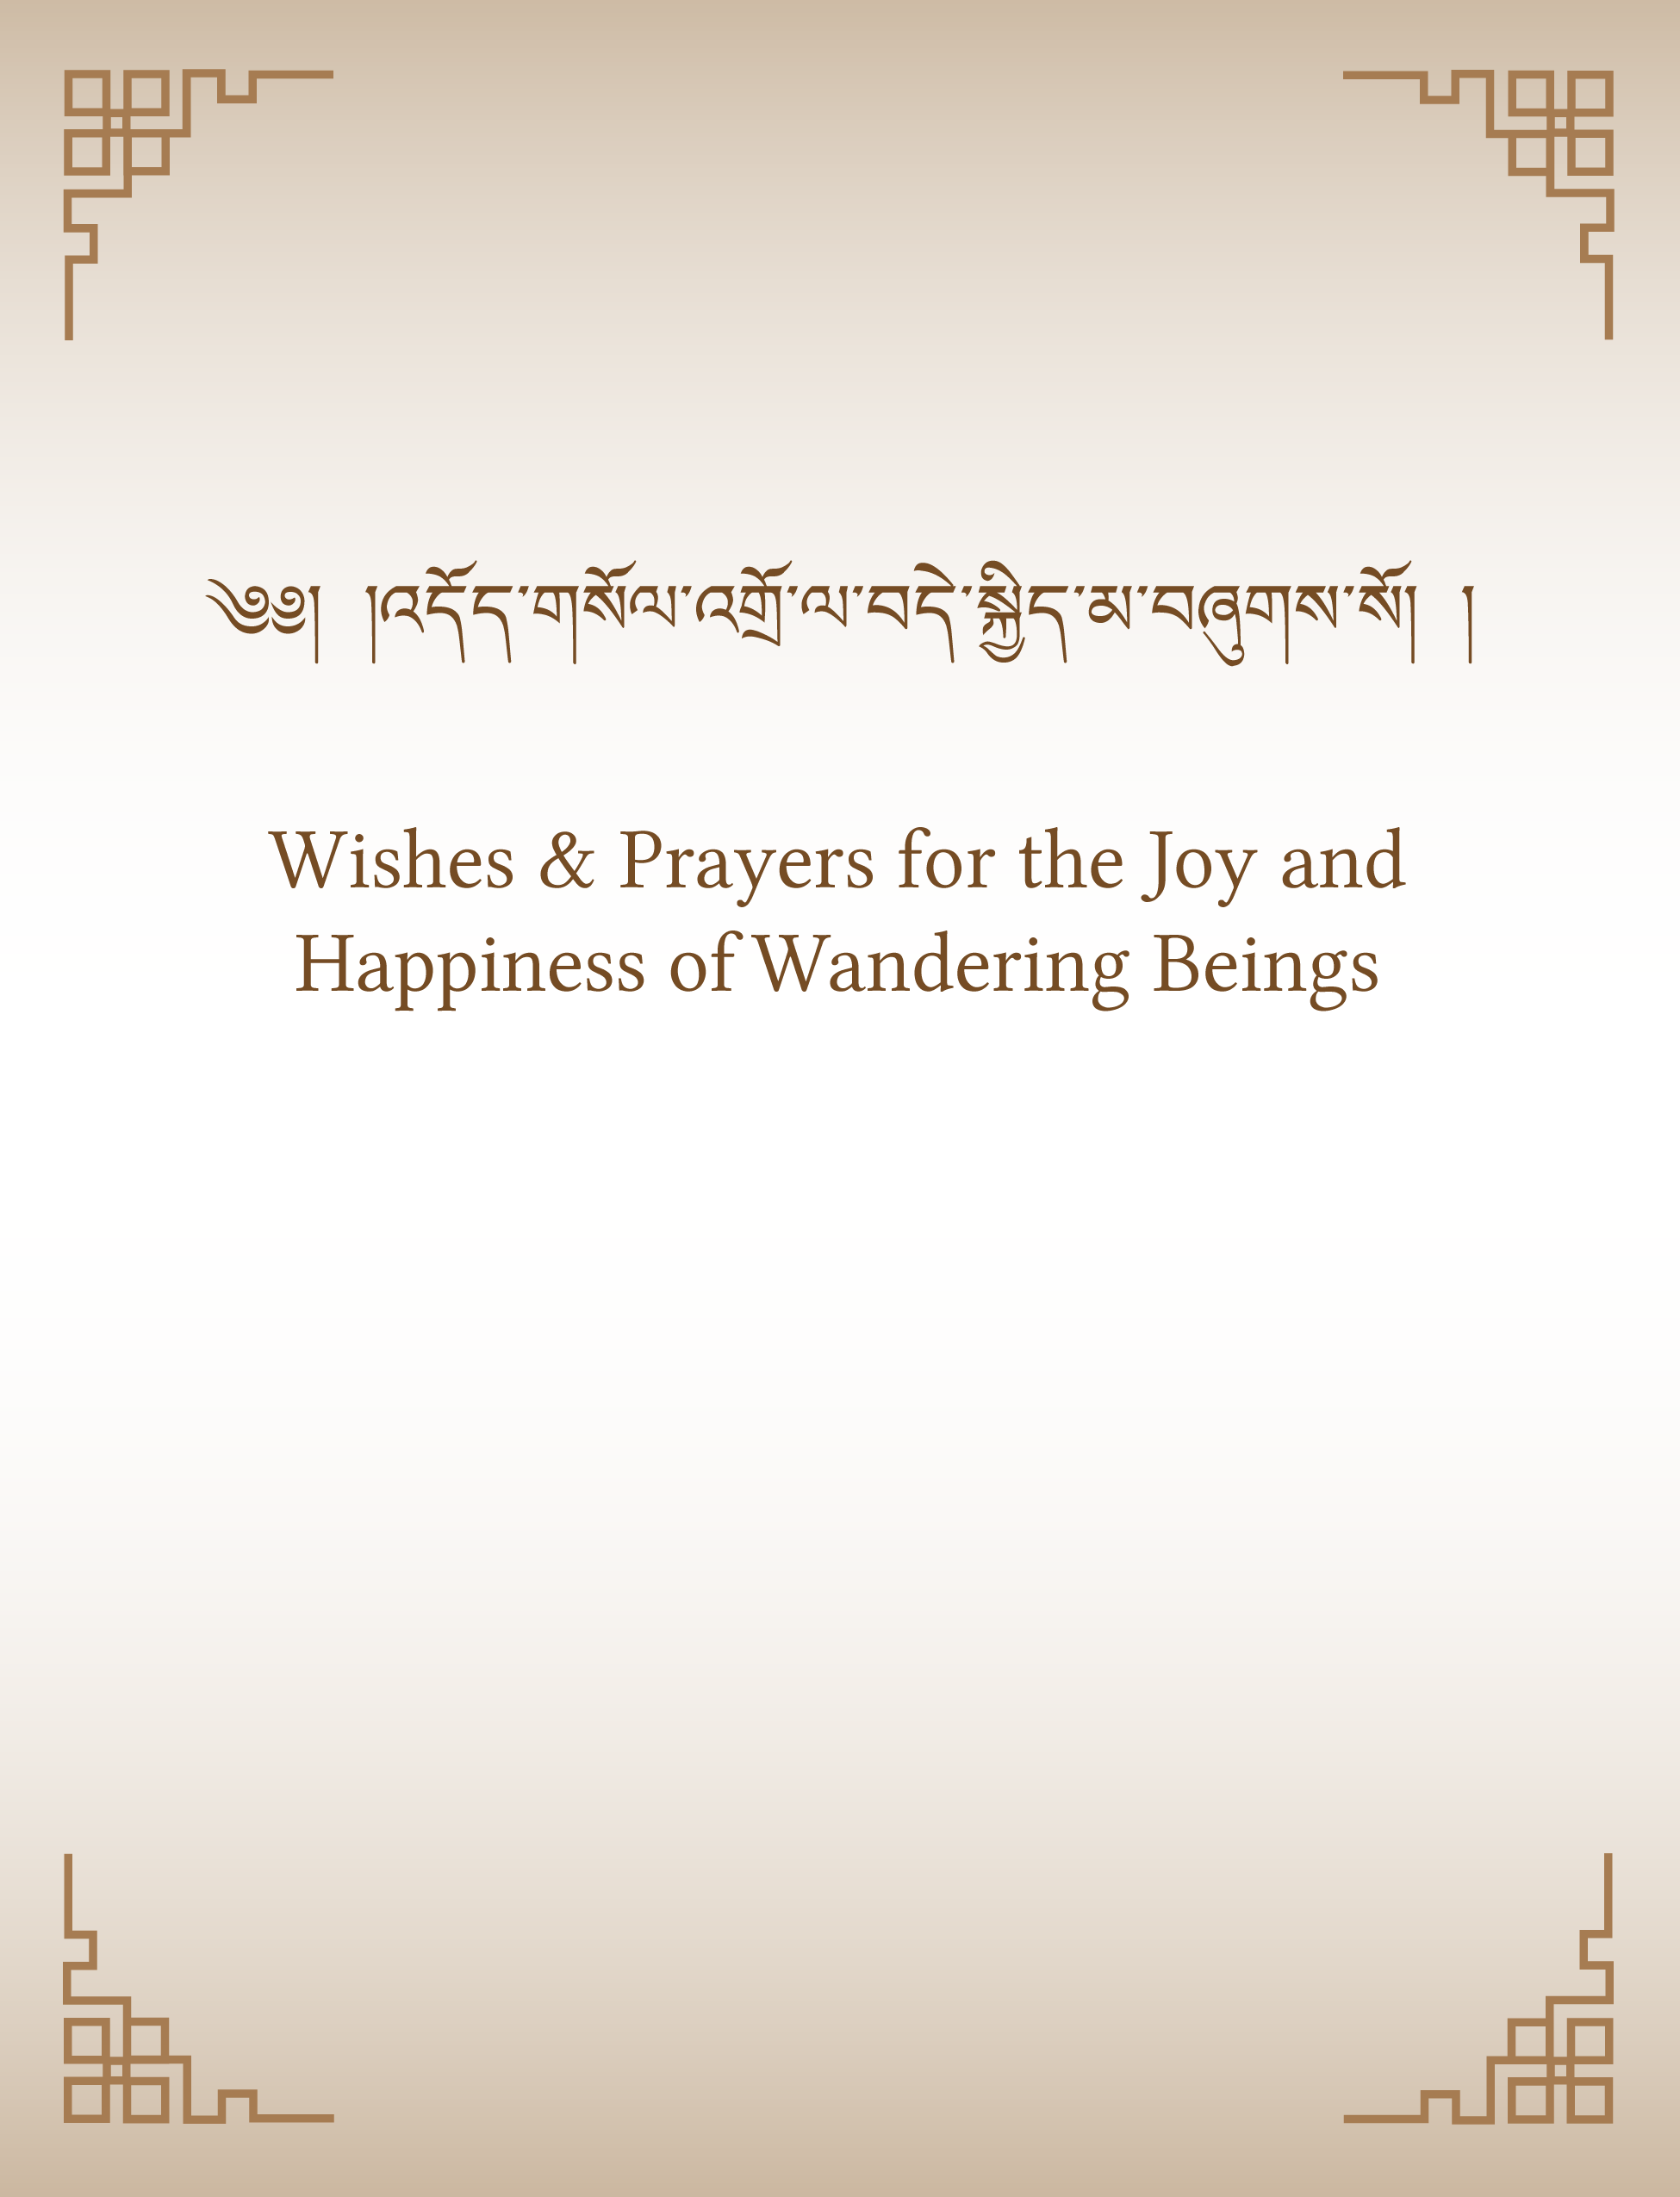 Wishes & Prayers for the Joy and Happiness of Wandering Beings_v.2